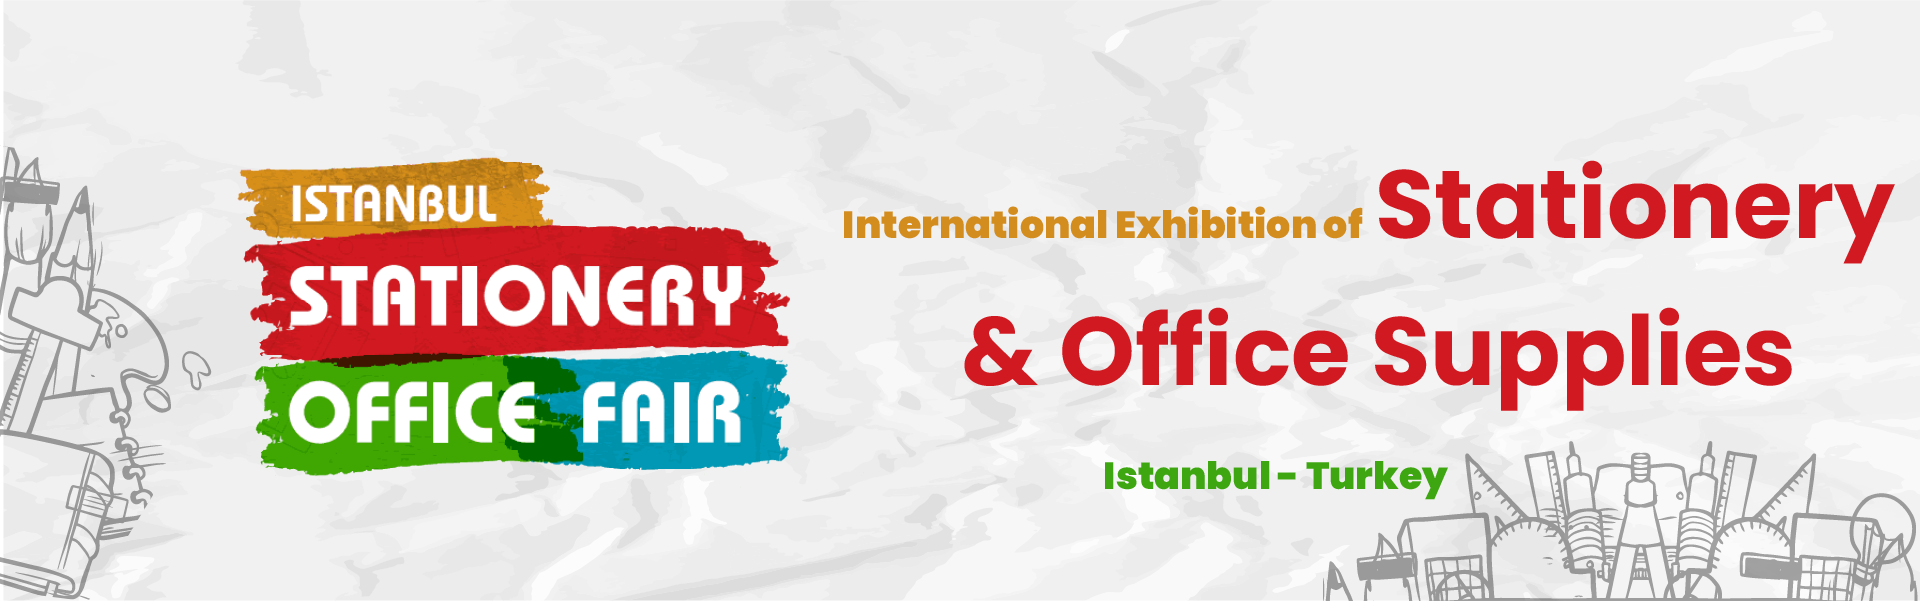 Istanbul International Exhibition of Stationery and office supplies